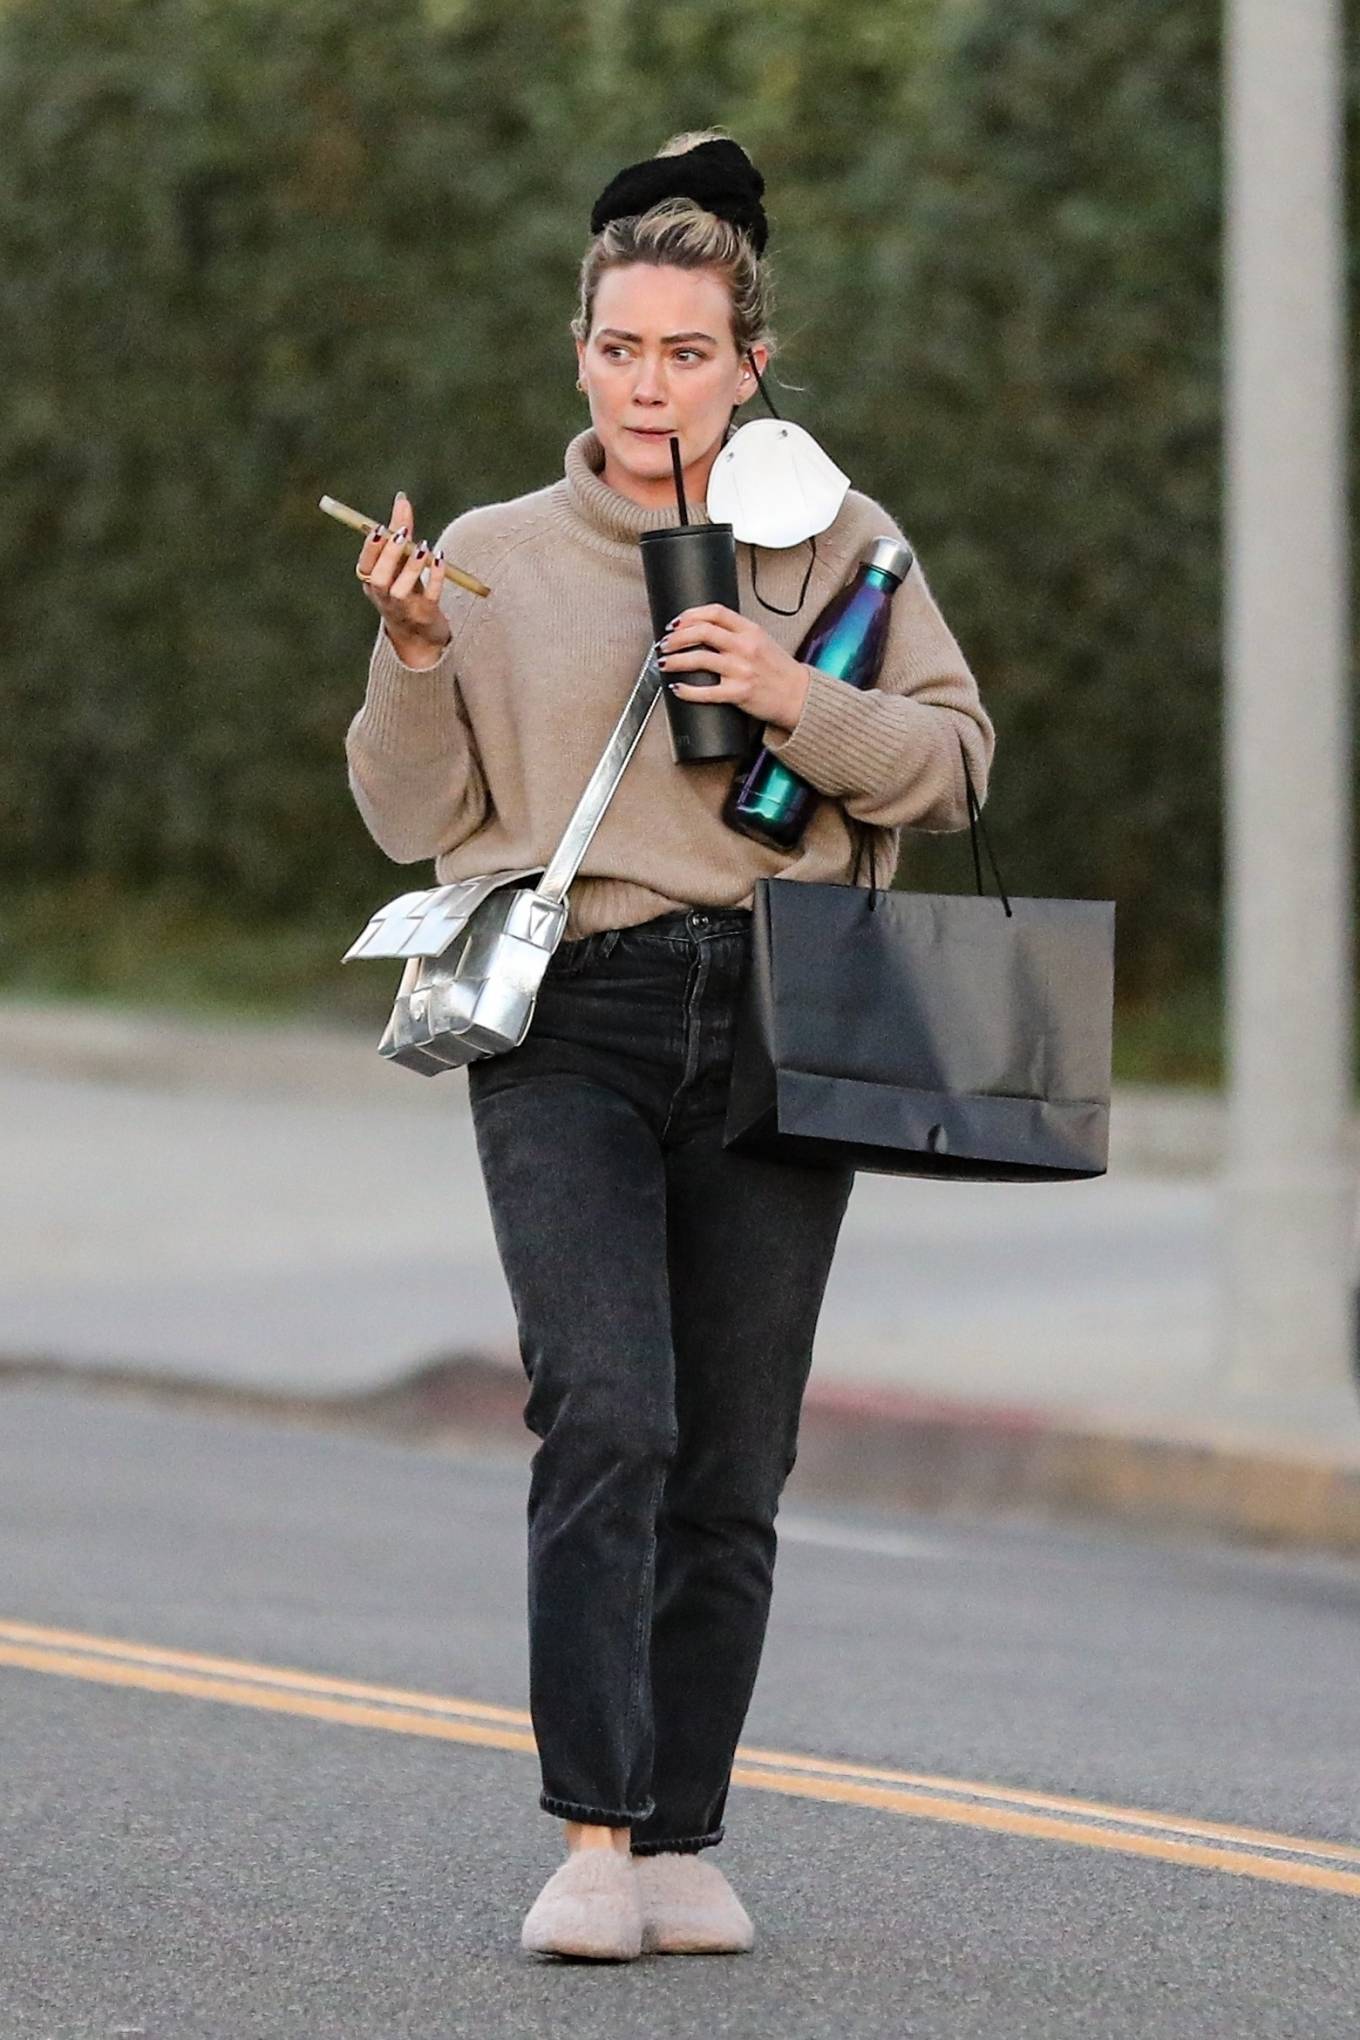 Hilary Duff 2021 : Hilary Duff – Chats on her phone while out in Beverly Hills-23